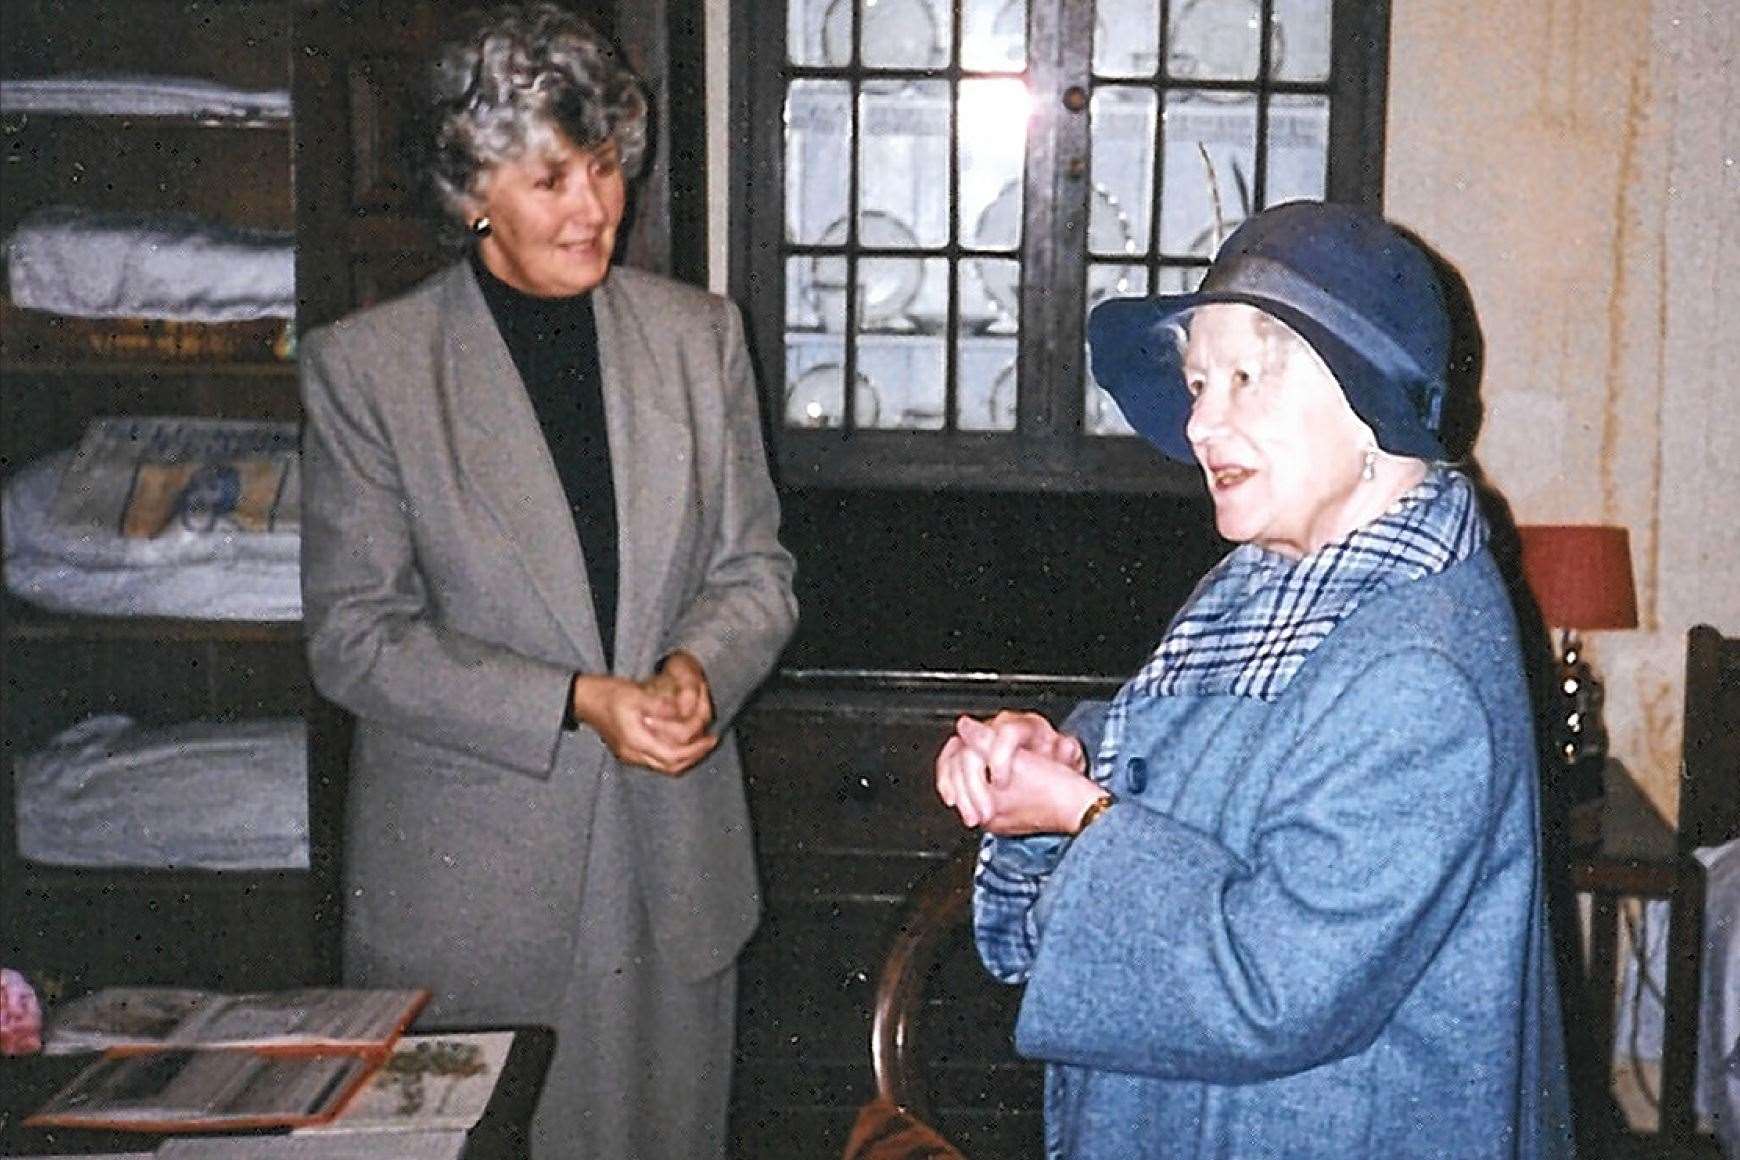 On a visit to Mary Ann’s Cottage in August 1993, the Queen Mother was pictured with the 'magic stone' clasped in her hand. The piece of volcanic rock may have been acquired by Mary Ann’s father when he was a sailor.